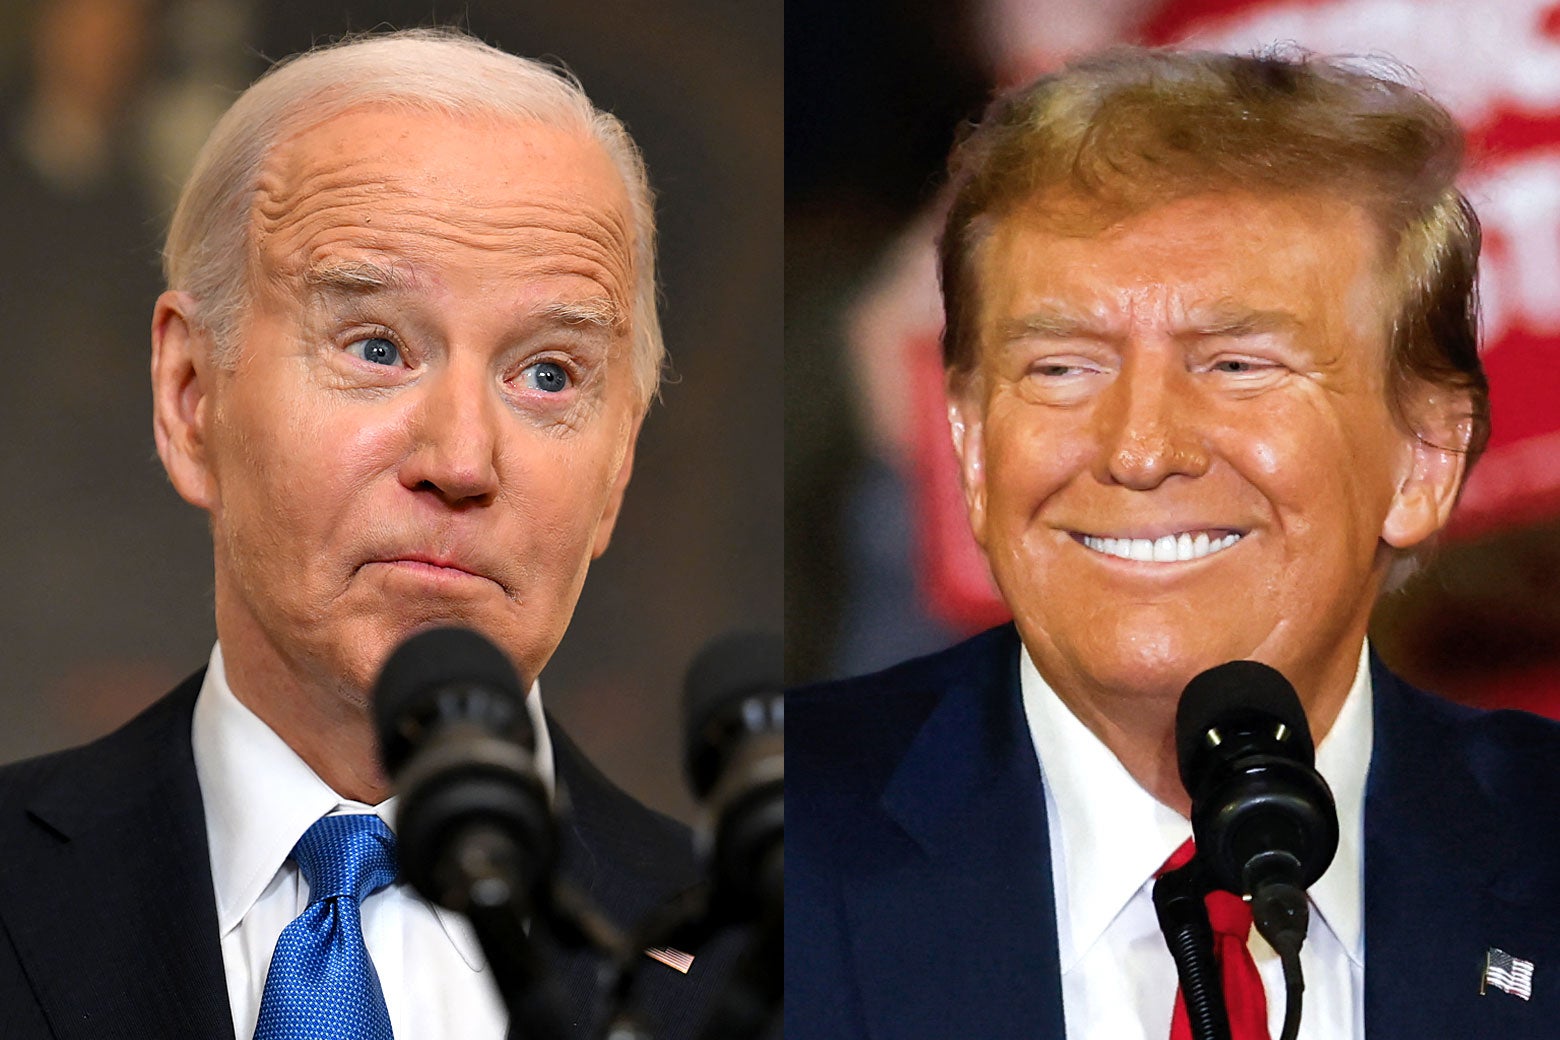 Everyone Needs to Stop Freaking Out About Biden’s Age Immediately Dahlia Lithwick